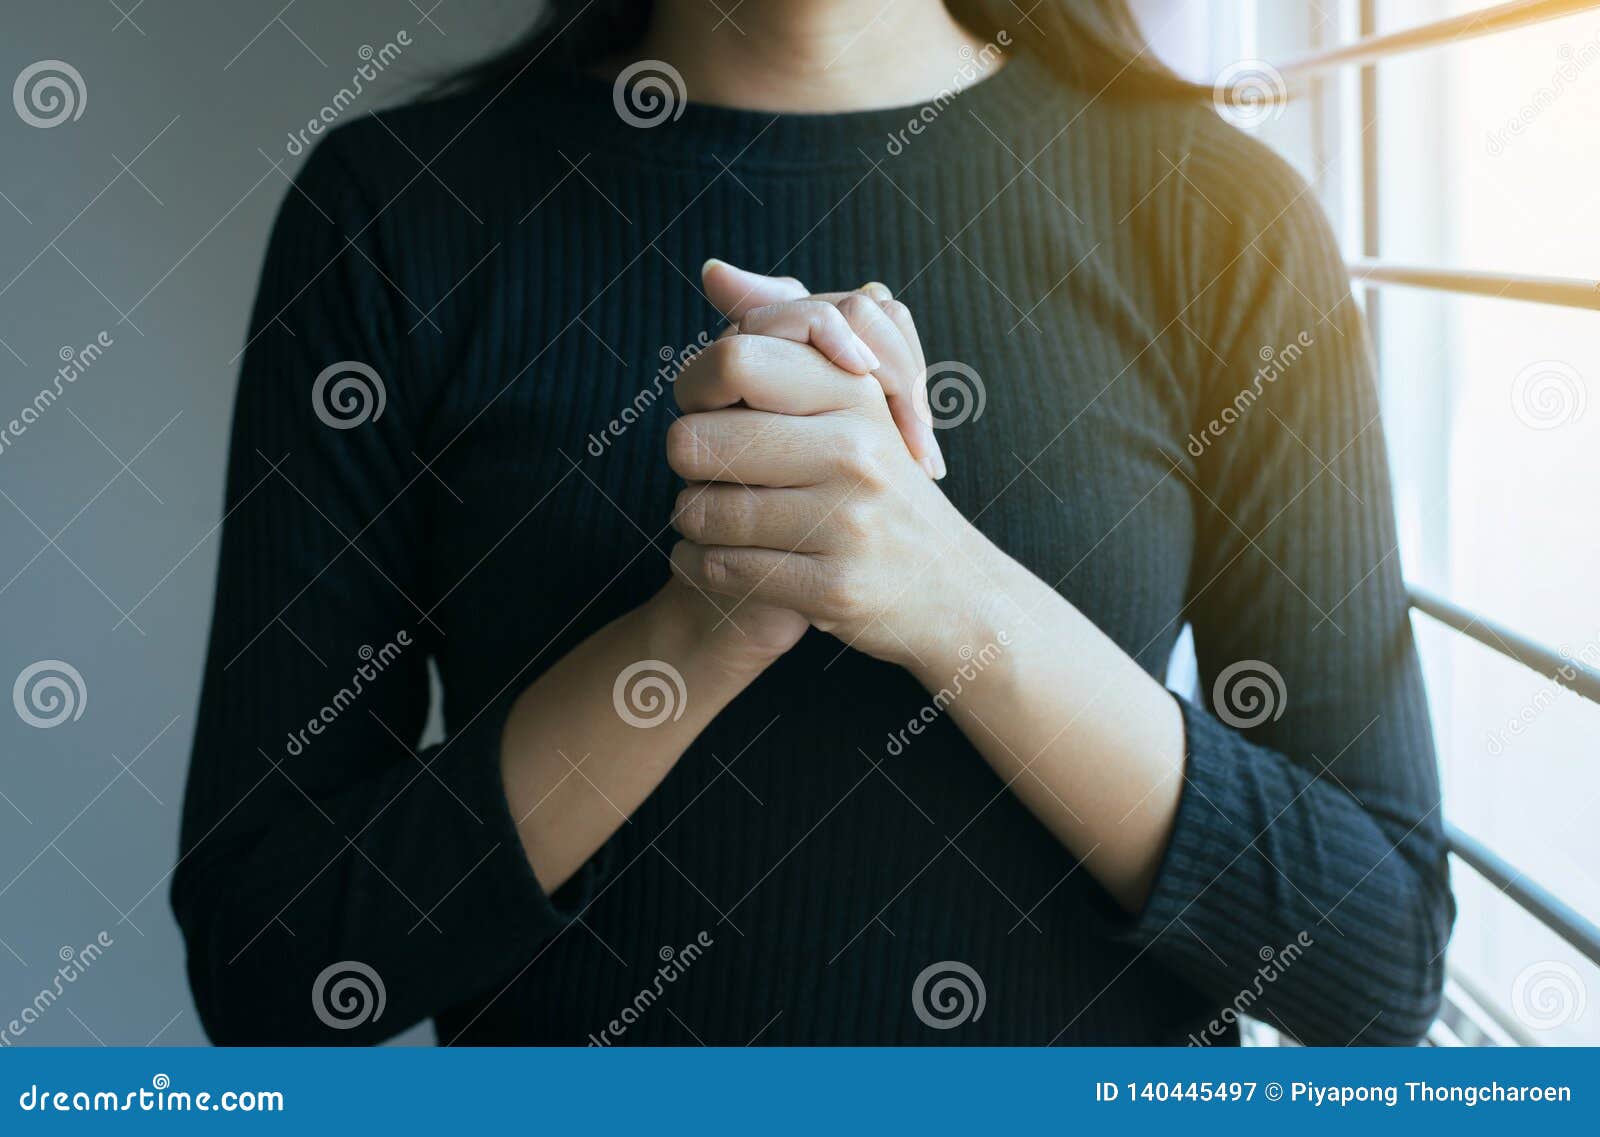 close up of hand woman in praying position,female pay respect or put your hands together in a prayer position